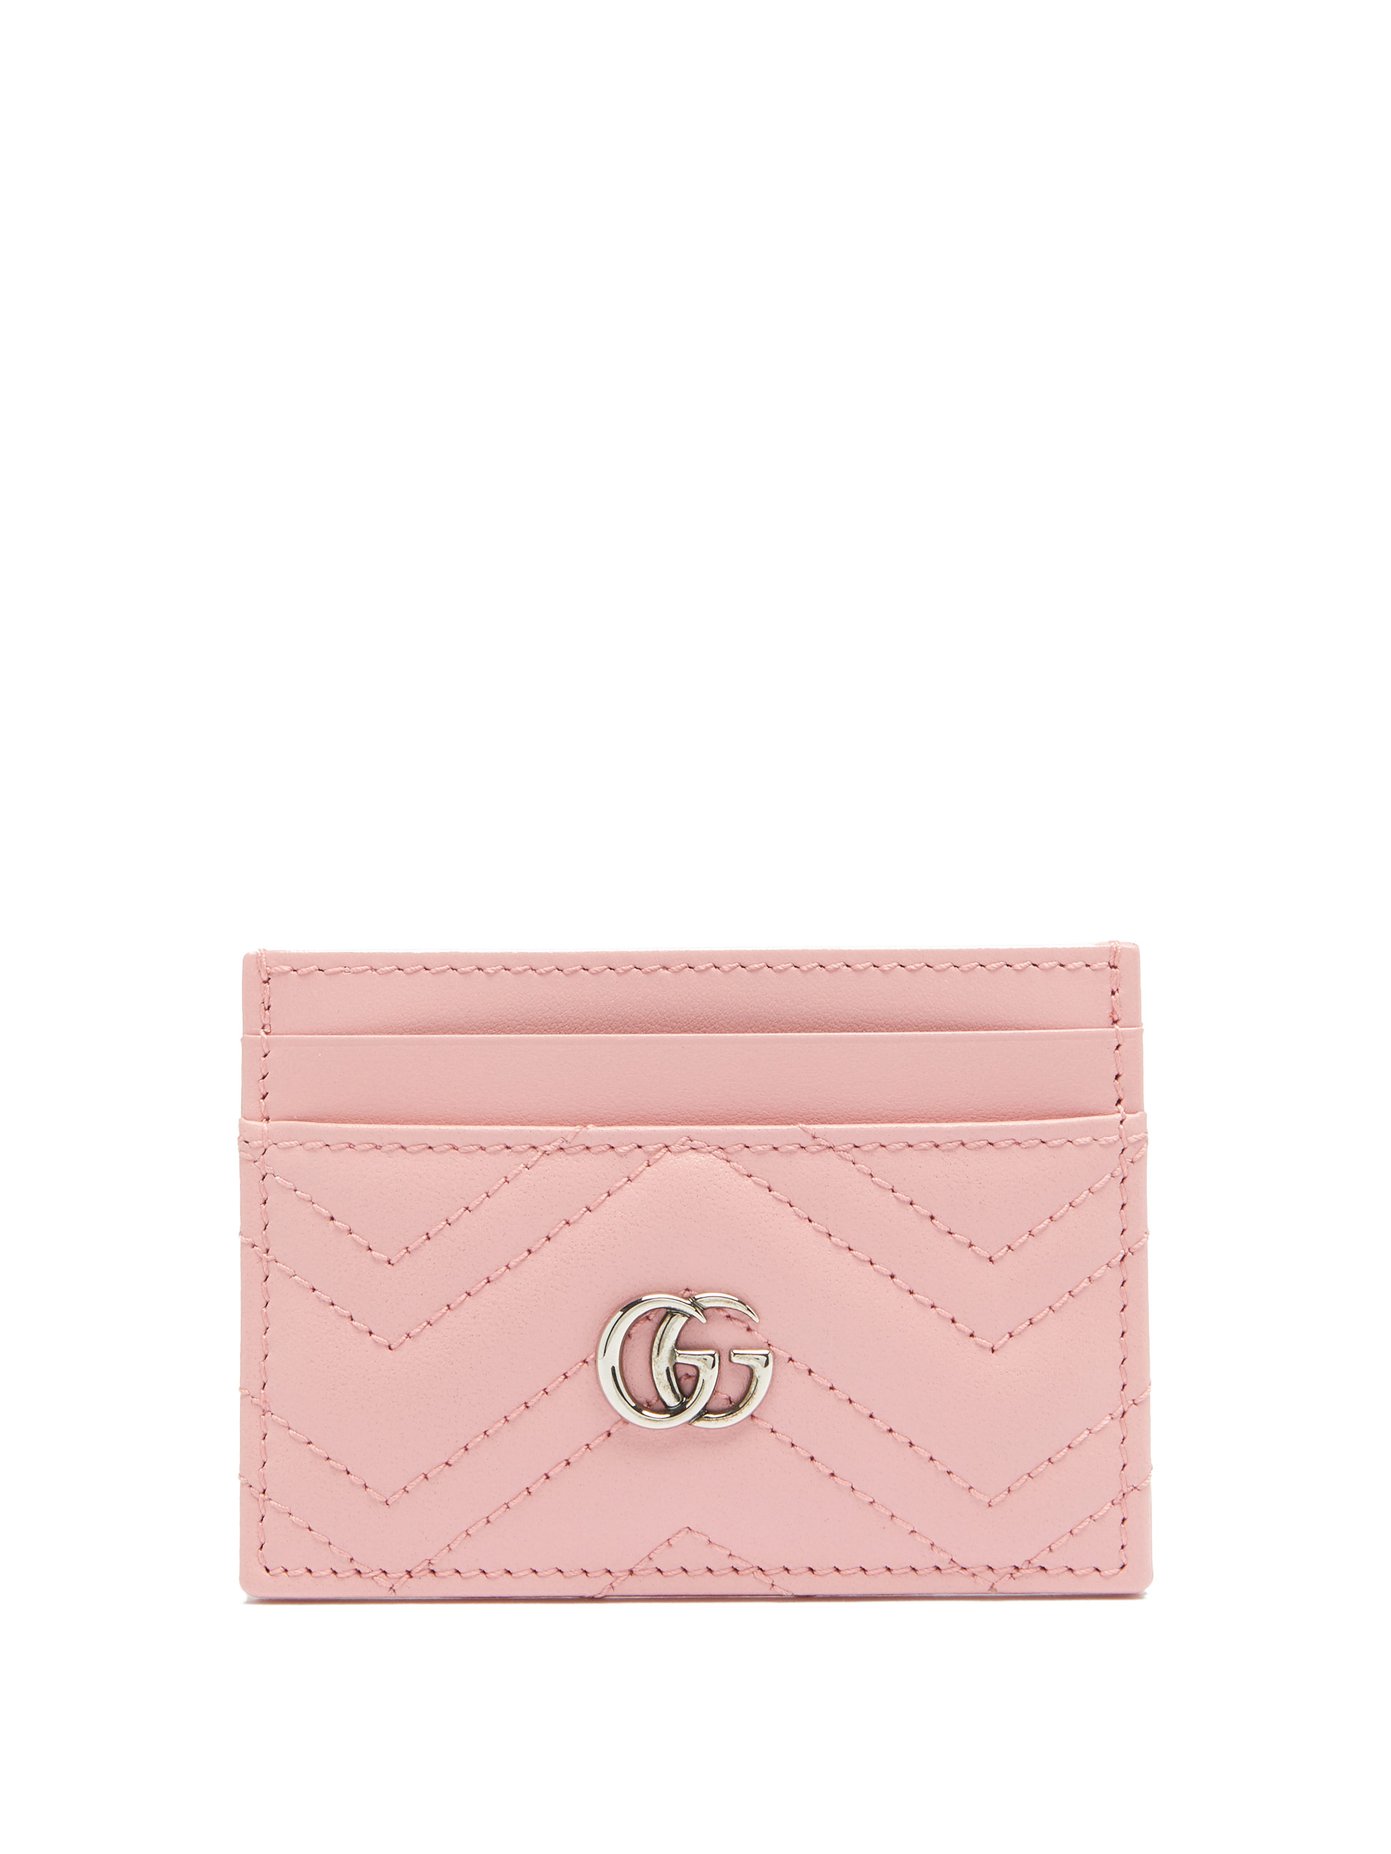 GG Marmont leather card holder | Gucci 